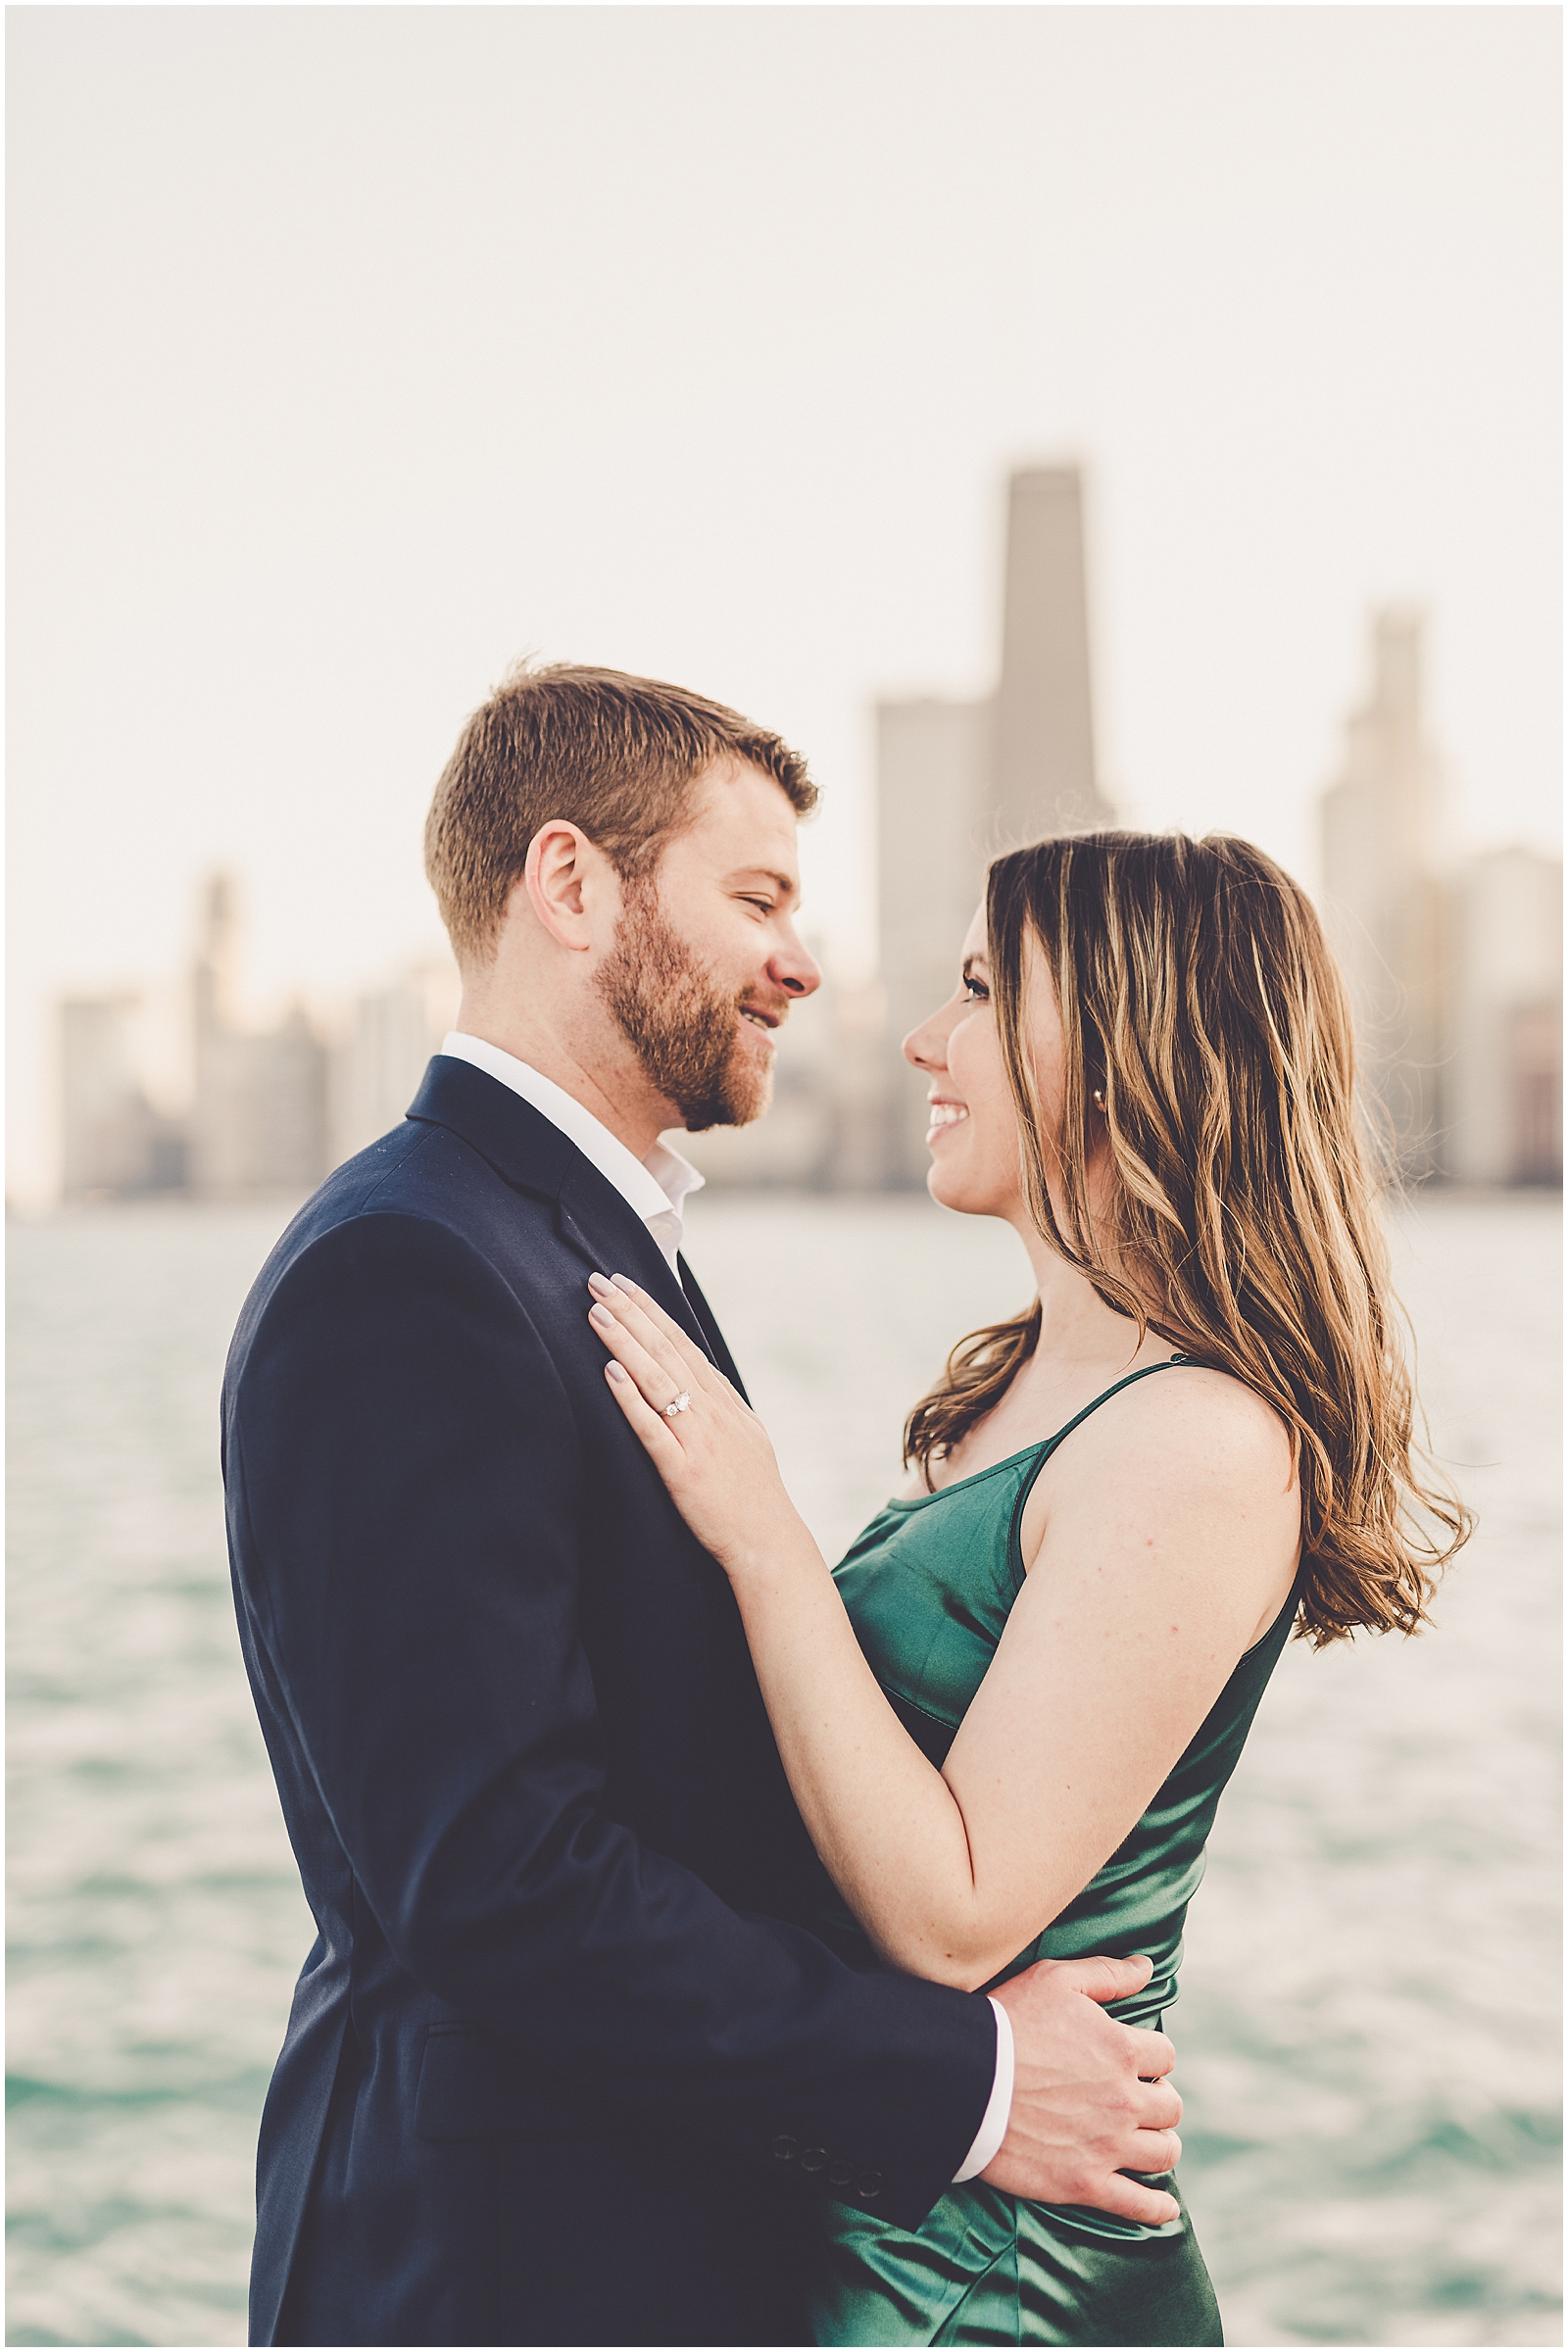 Elaine and Chris's Lincoln Park engagement photos in Chicago, Illinois with Chicagoland wedding photographer Kara Evans Photographer.